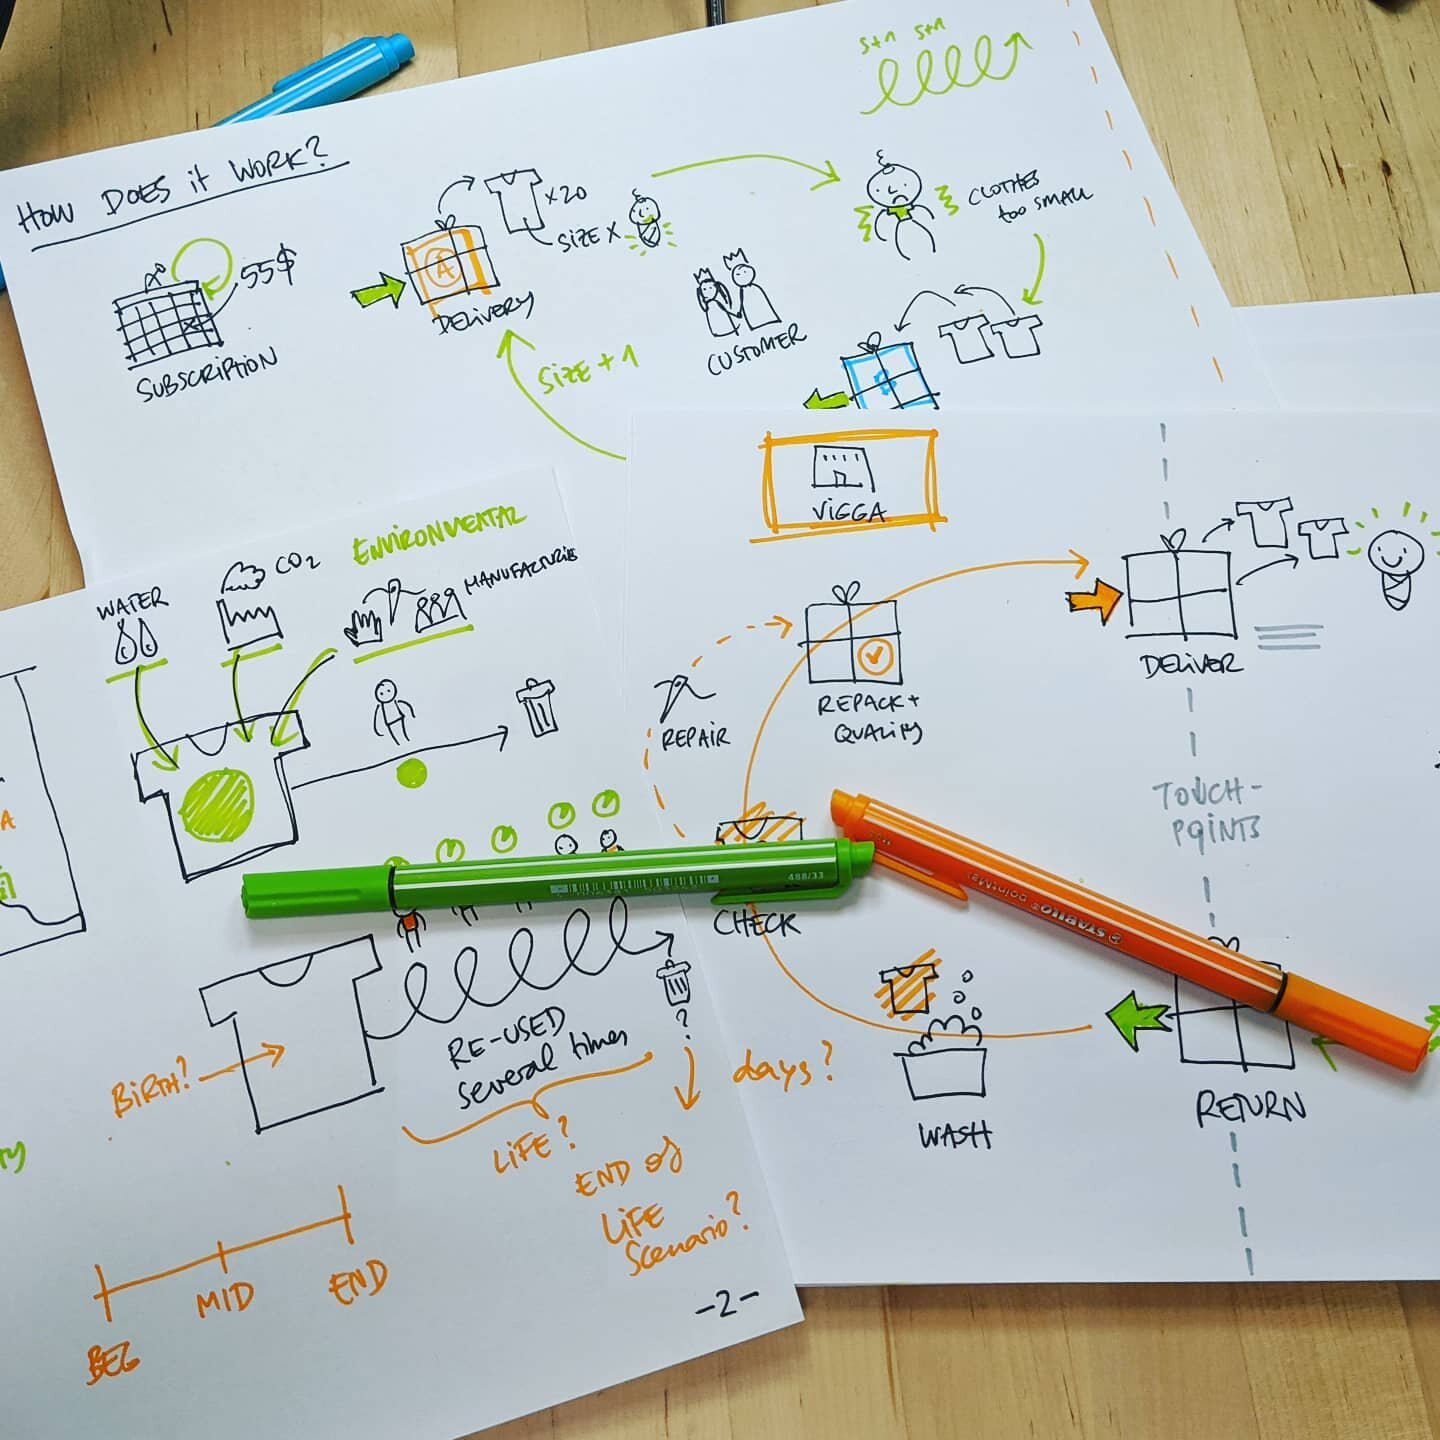 I think visual mapping is one of my favourite visual thinking activities.

Taking linear text (or conversations) and turning it in to spatially distributed visual goodness, showing its structure, parts and relationships. 

It's fun to explore a topic